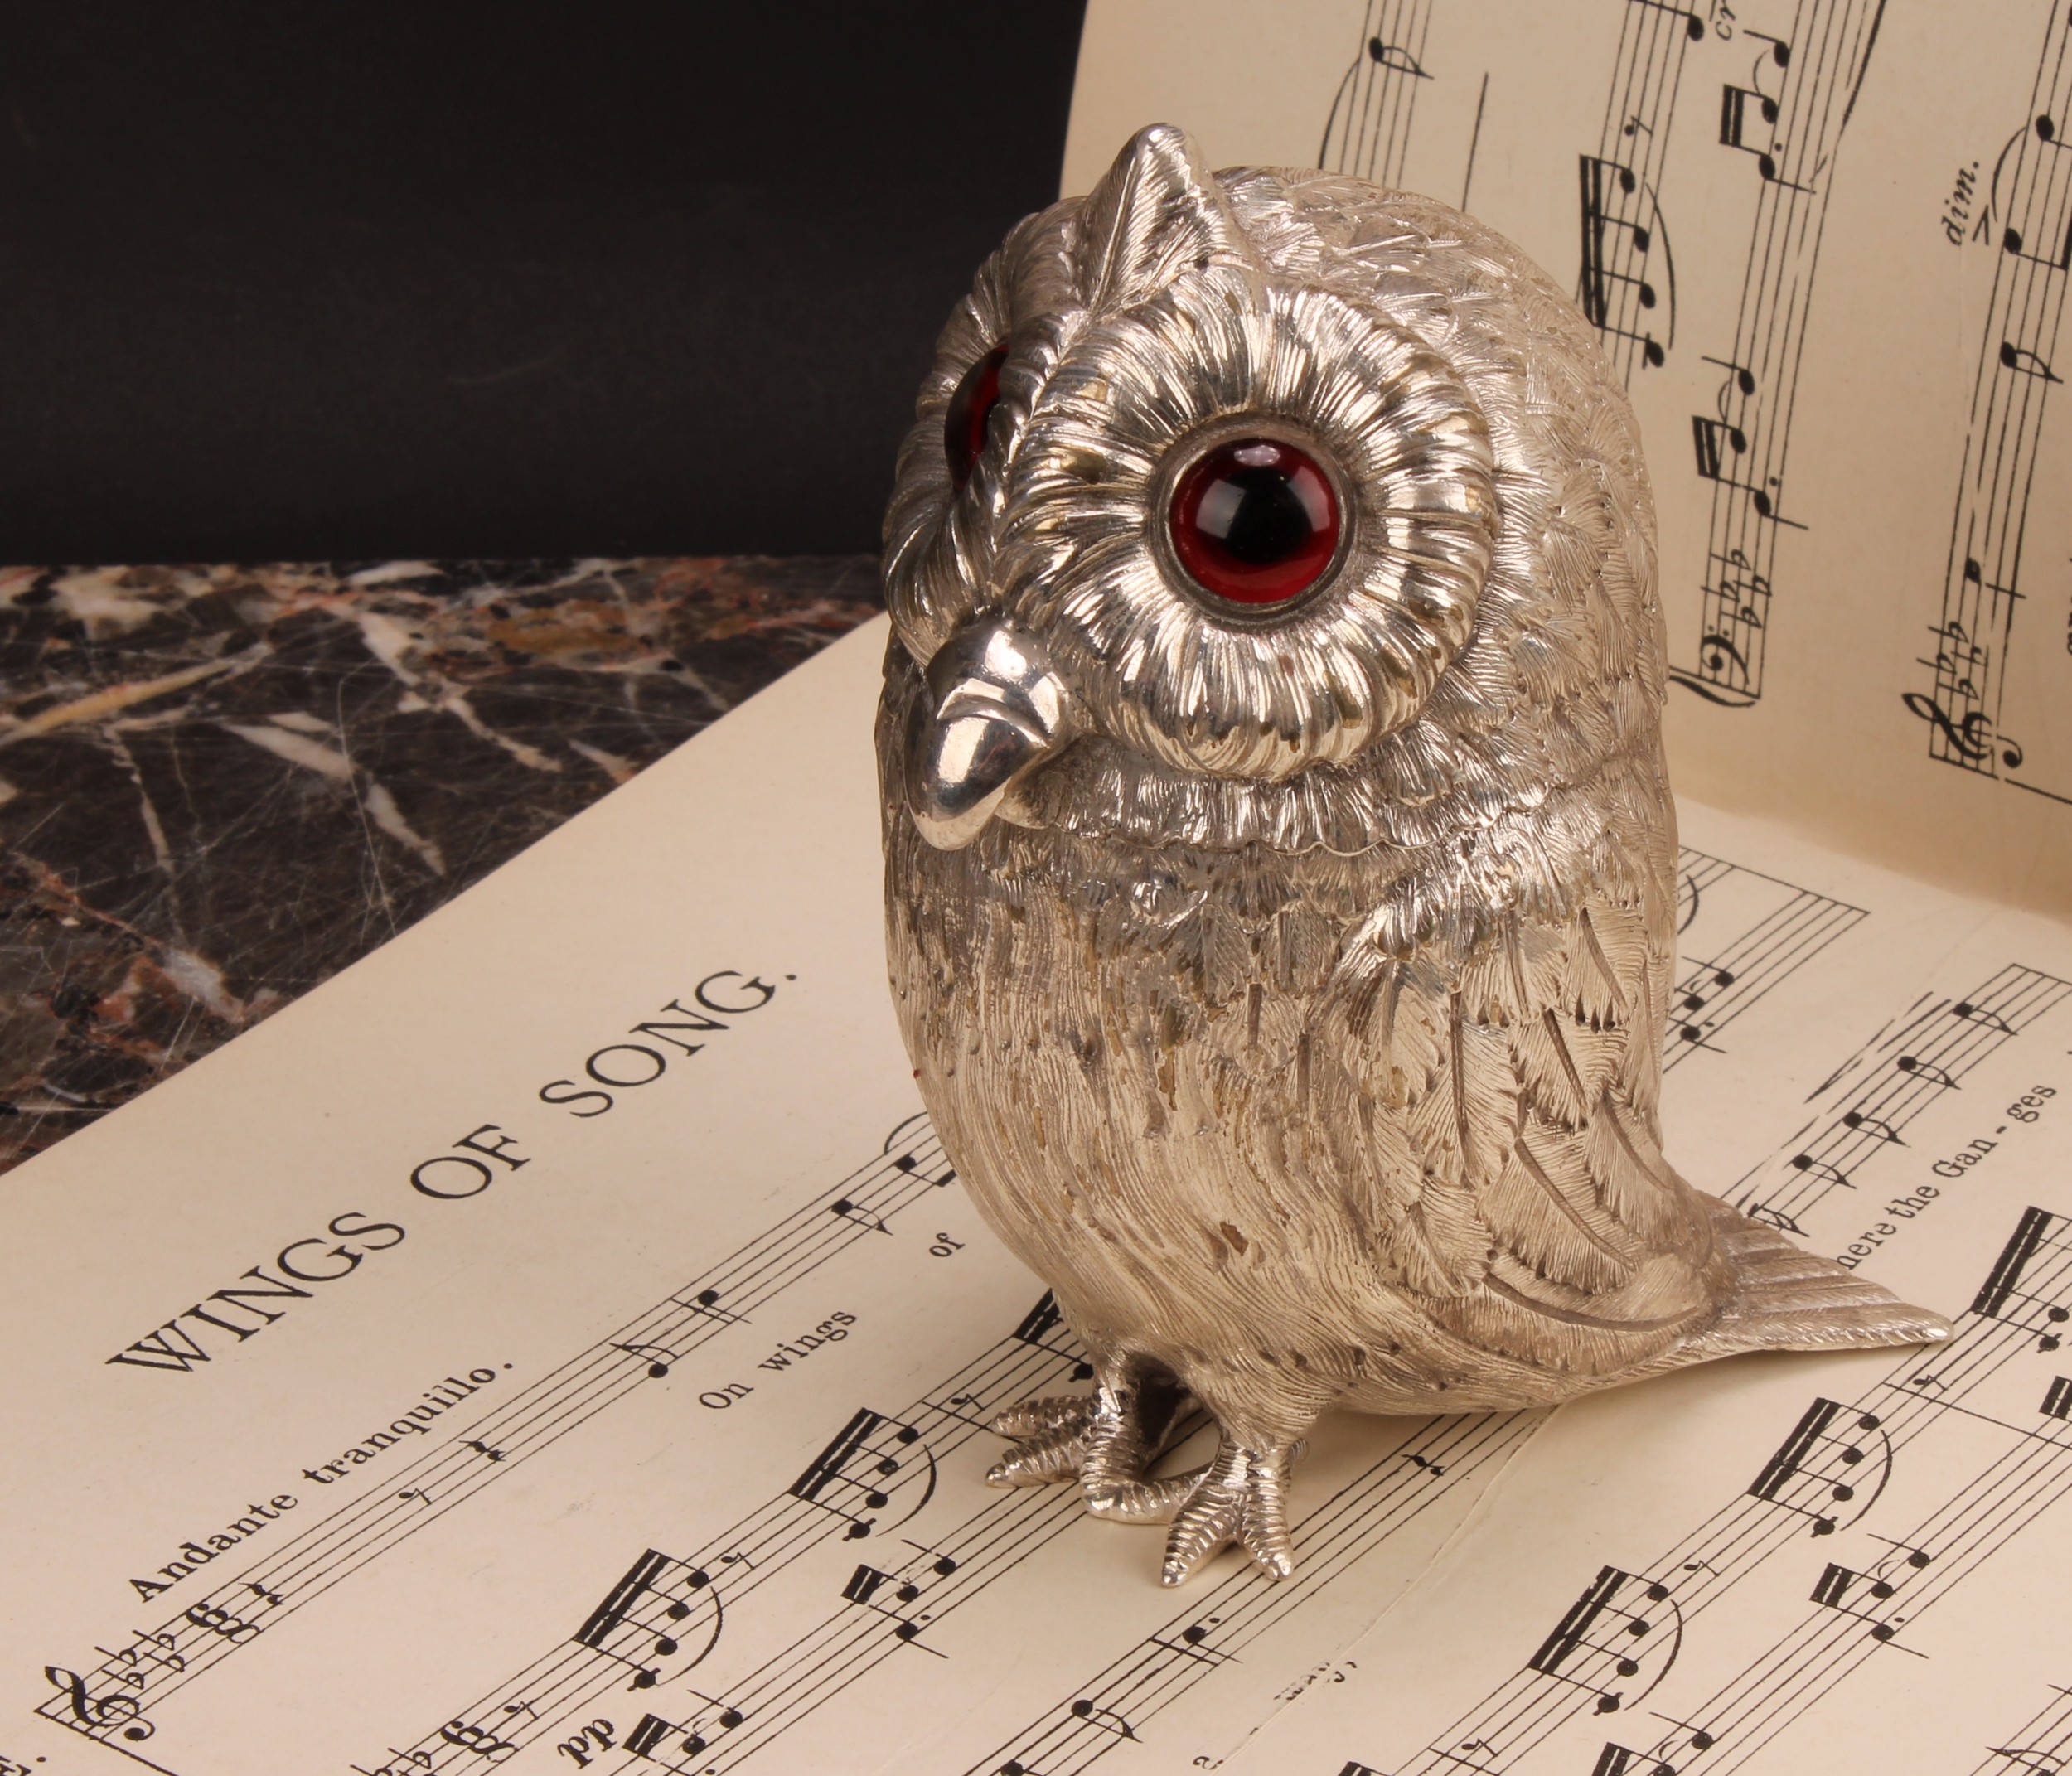 A large silver plated novelty mustard, as an owl, hinged cover, glass eyes, 12cm high